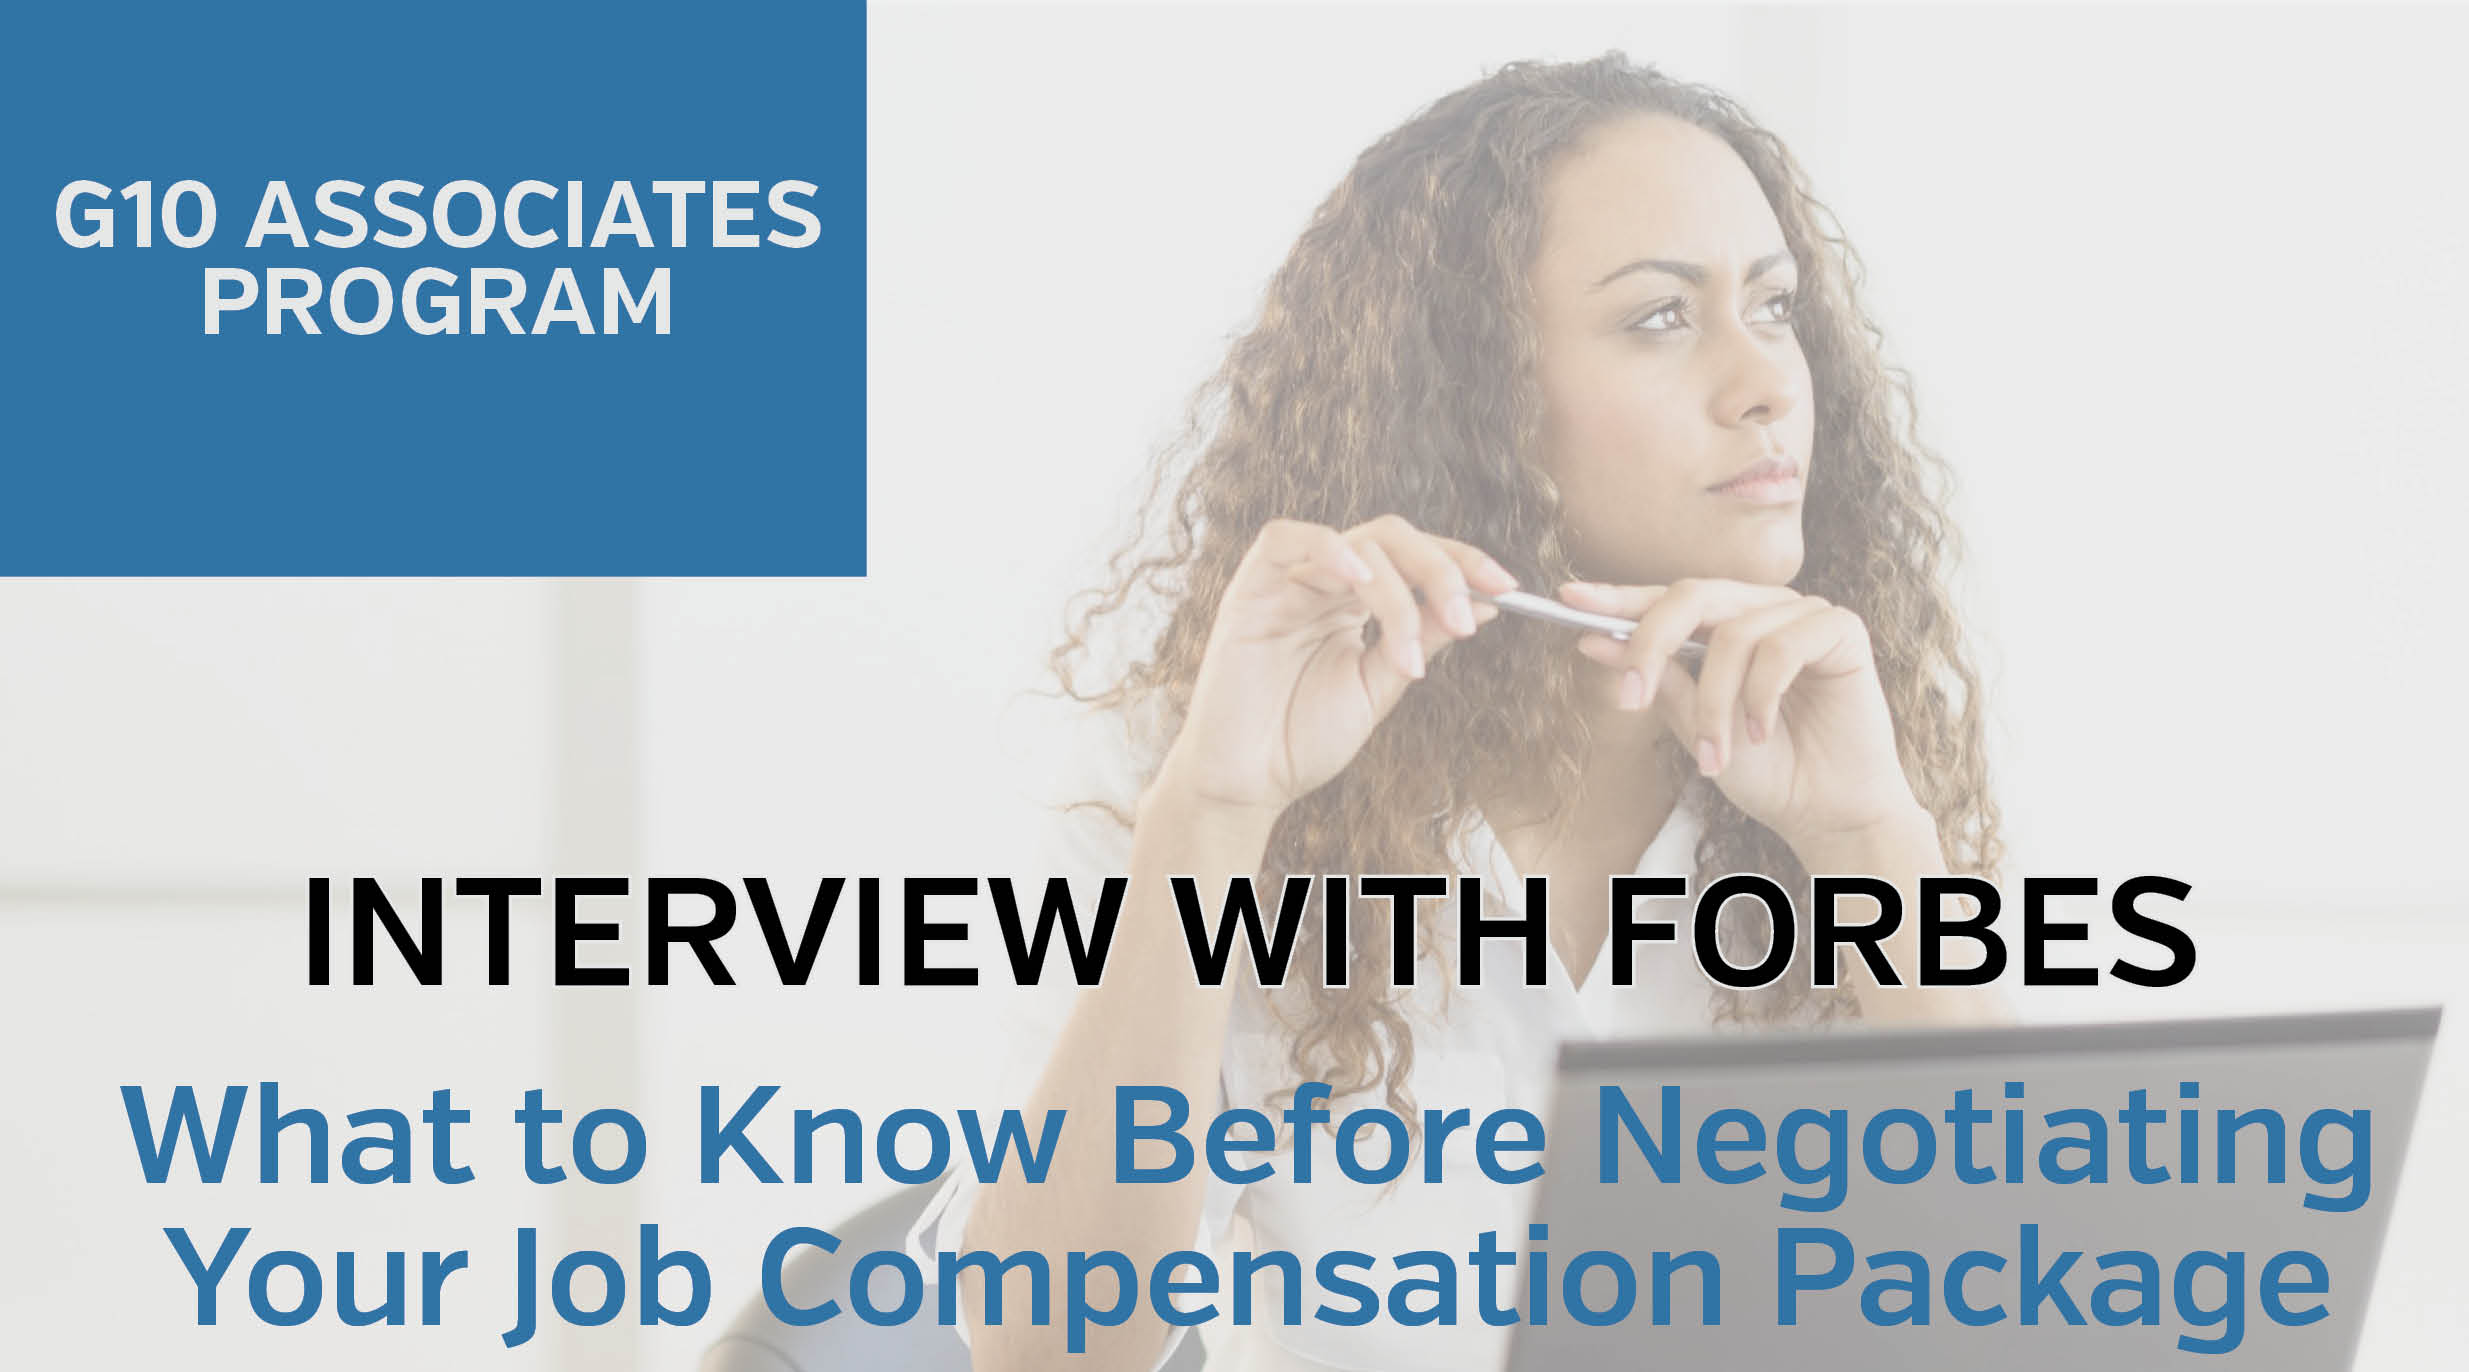 10 Associates Program Shares What to Know Before Negotiating Your Job Compensation Package with Forbesv2.jpg